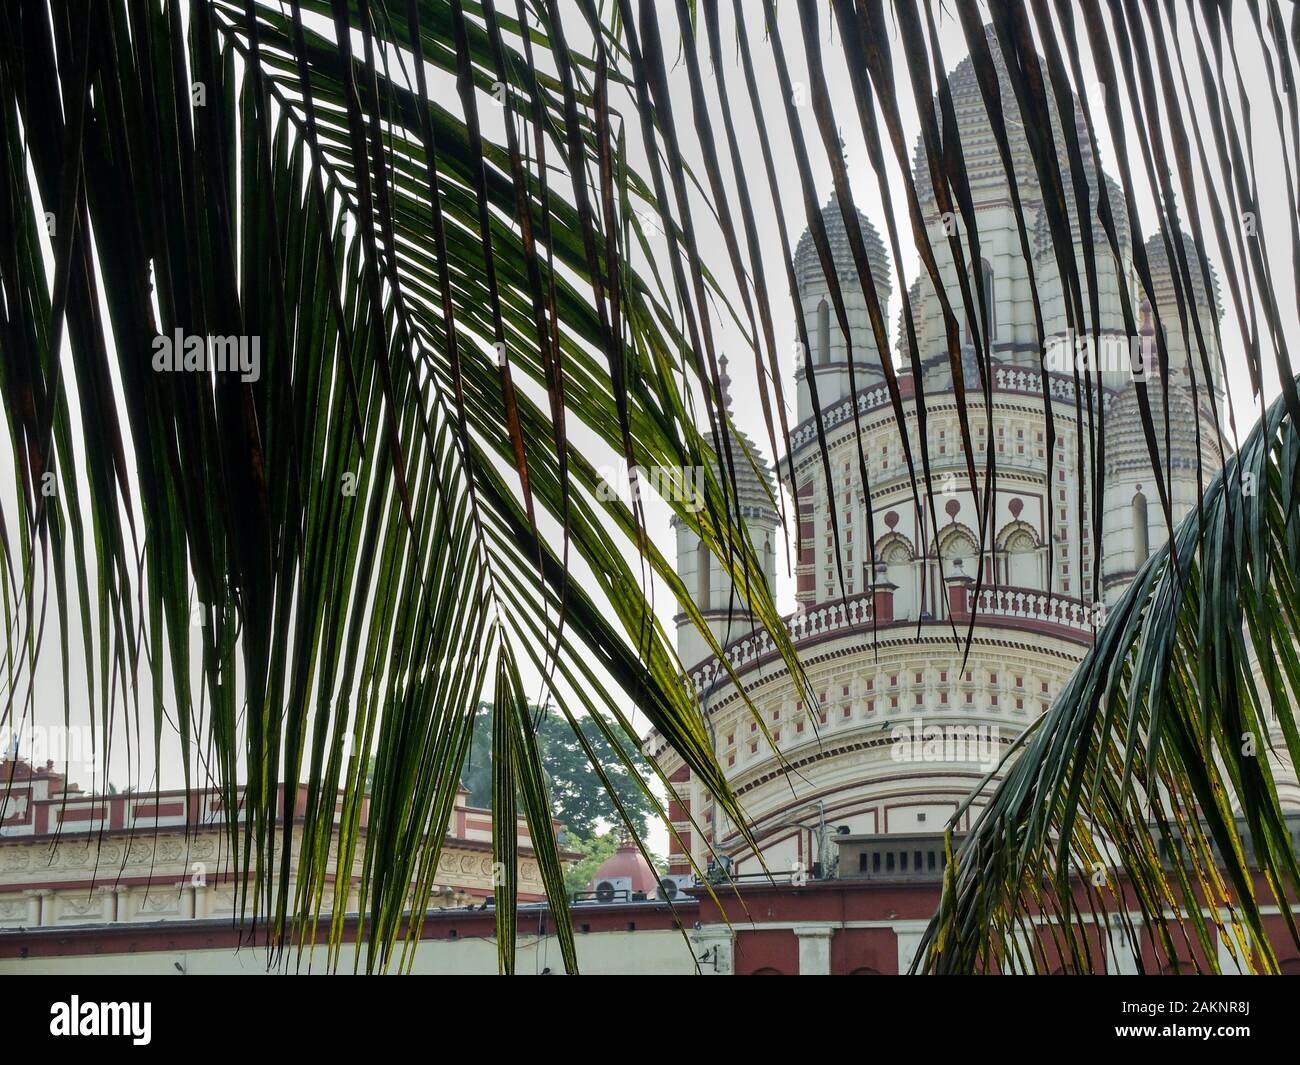 KOLKATA,WEST BENGAL/INDIA-MARCH 22 2018:Part of Dakshineswar Kali Temple seen with palm leaves in focus in the foreground. Stock Photo